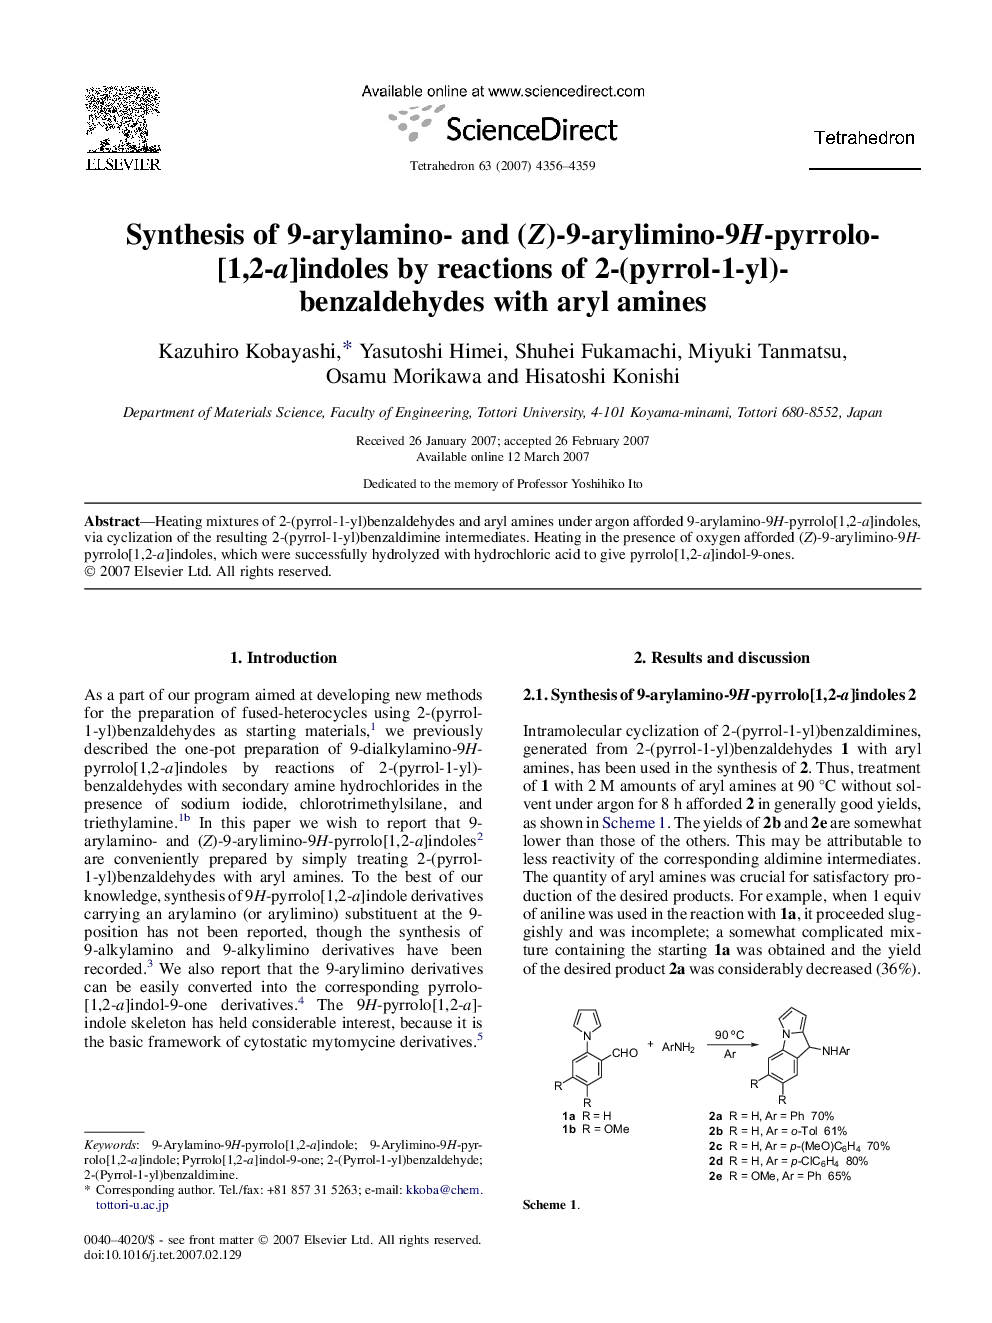 Synthesis of 9-arylamino- and (Z)-9-arylimino-9H-pyrrolo[1,2-a]indoles by reactions of 2-(pyrrol-1-yl)benzaldehydes with aryl amines